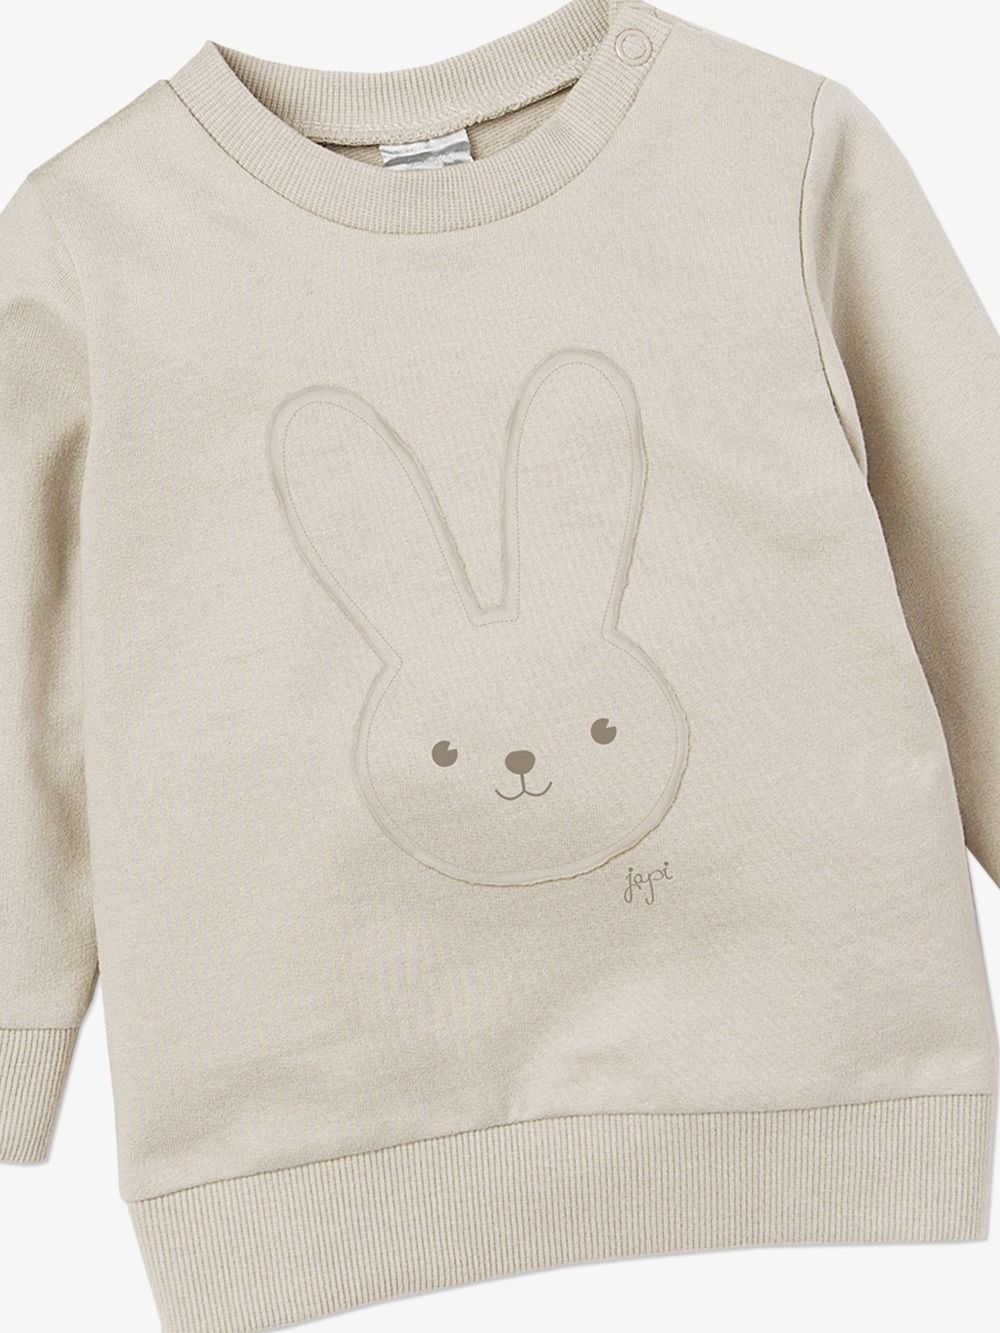 Pullover + Trousers Rabbit